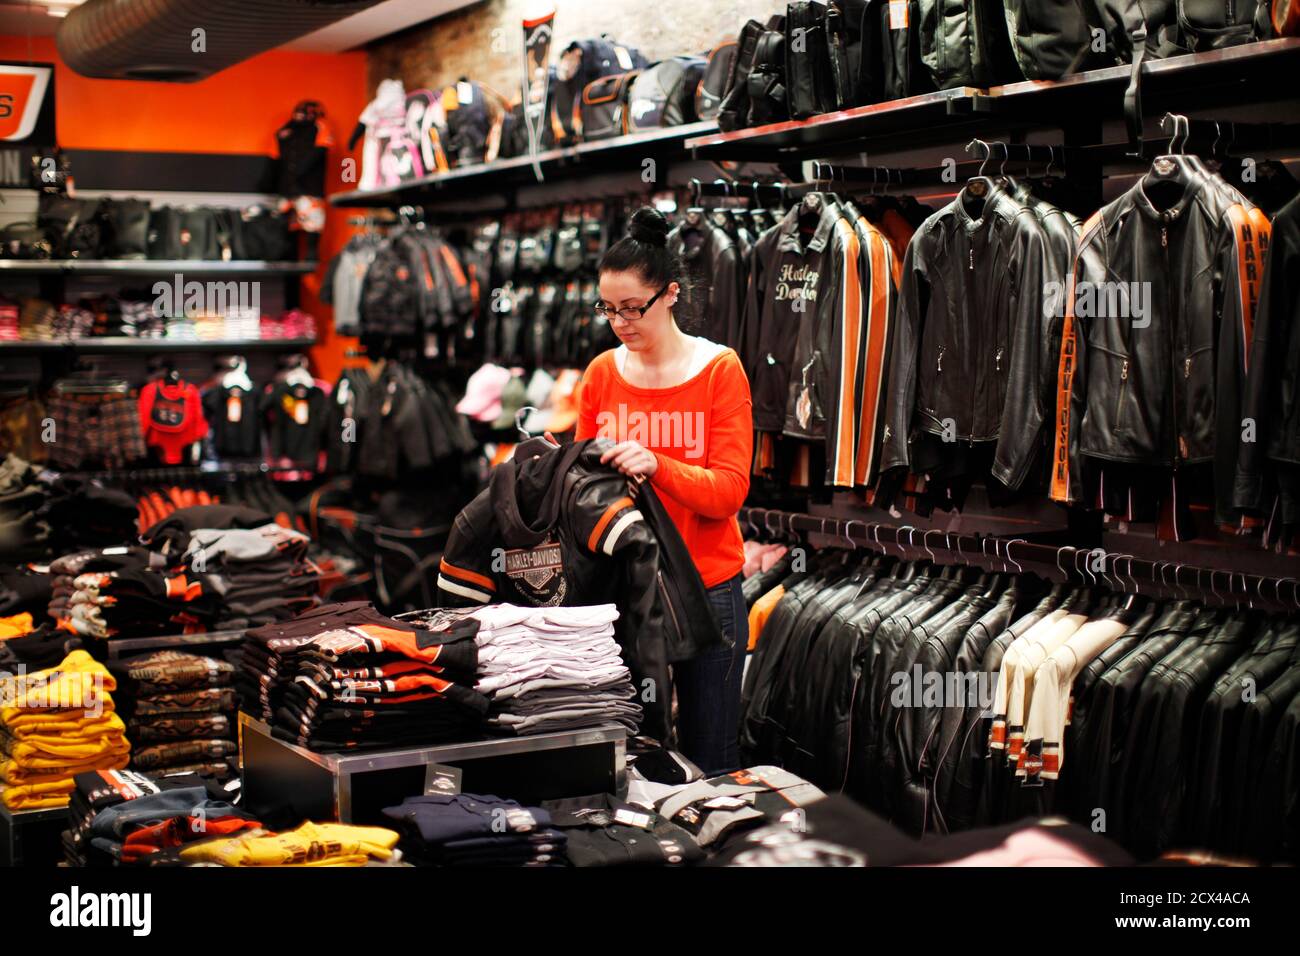 A Woman Looks At A Jacket In The Harley Davidson Manhattan Store In New York December